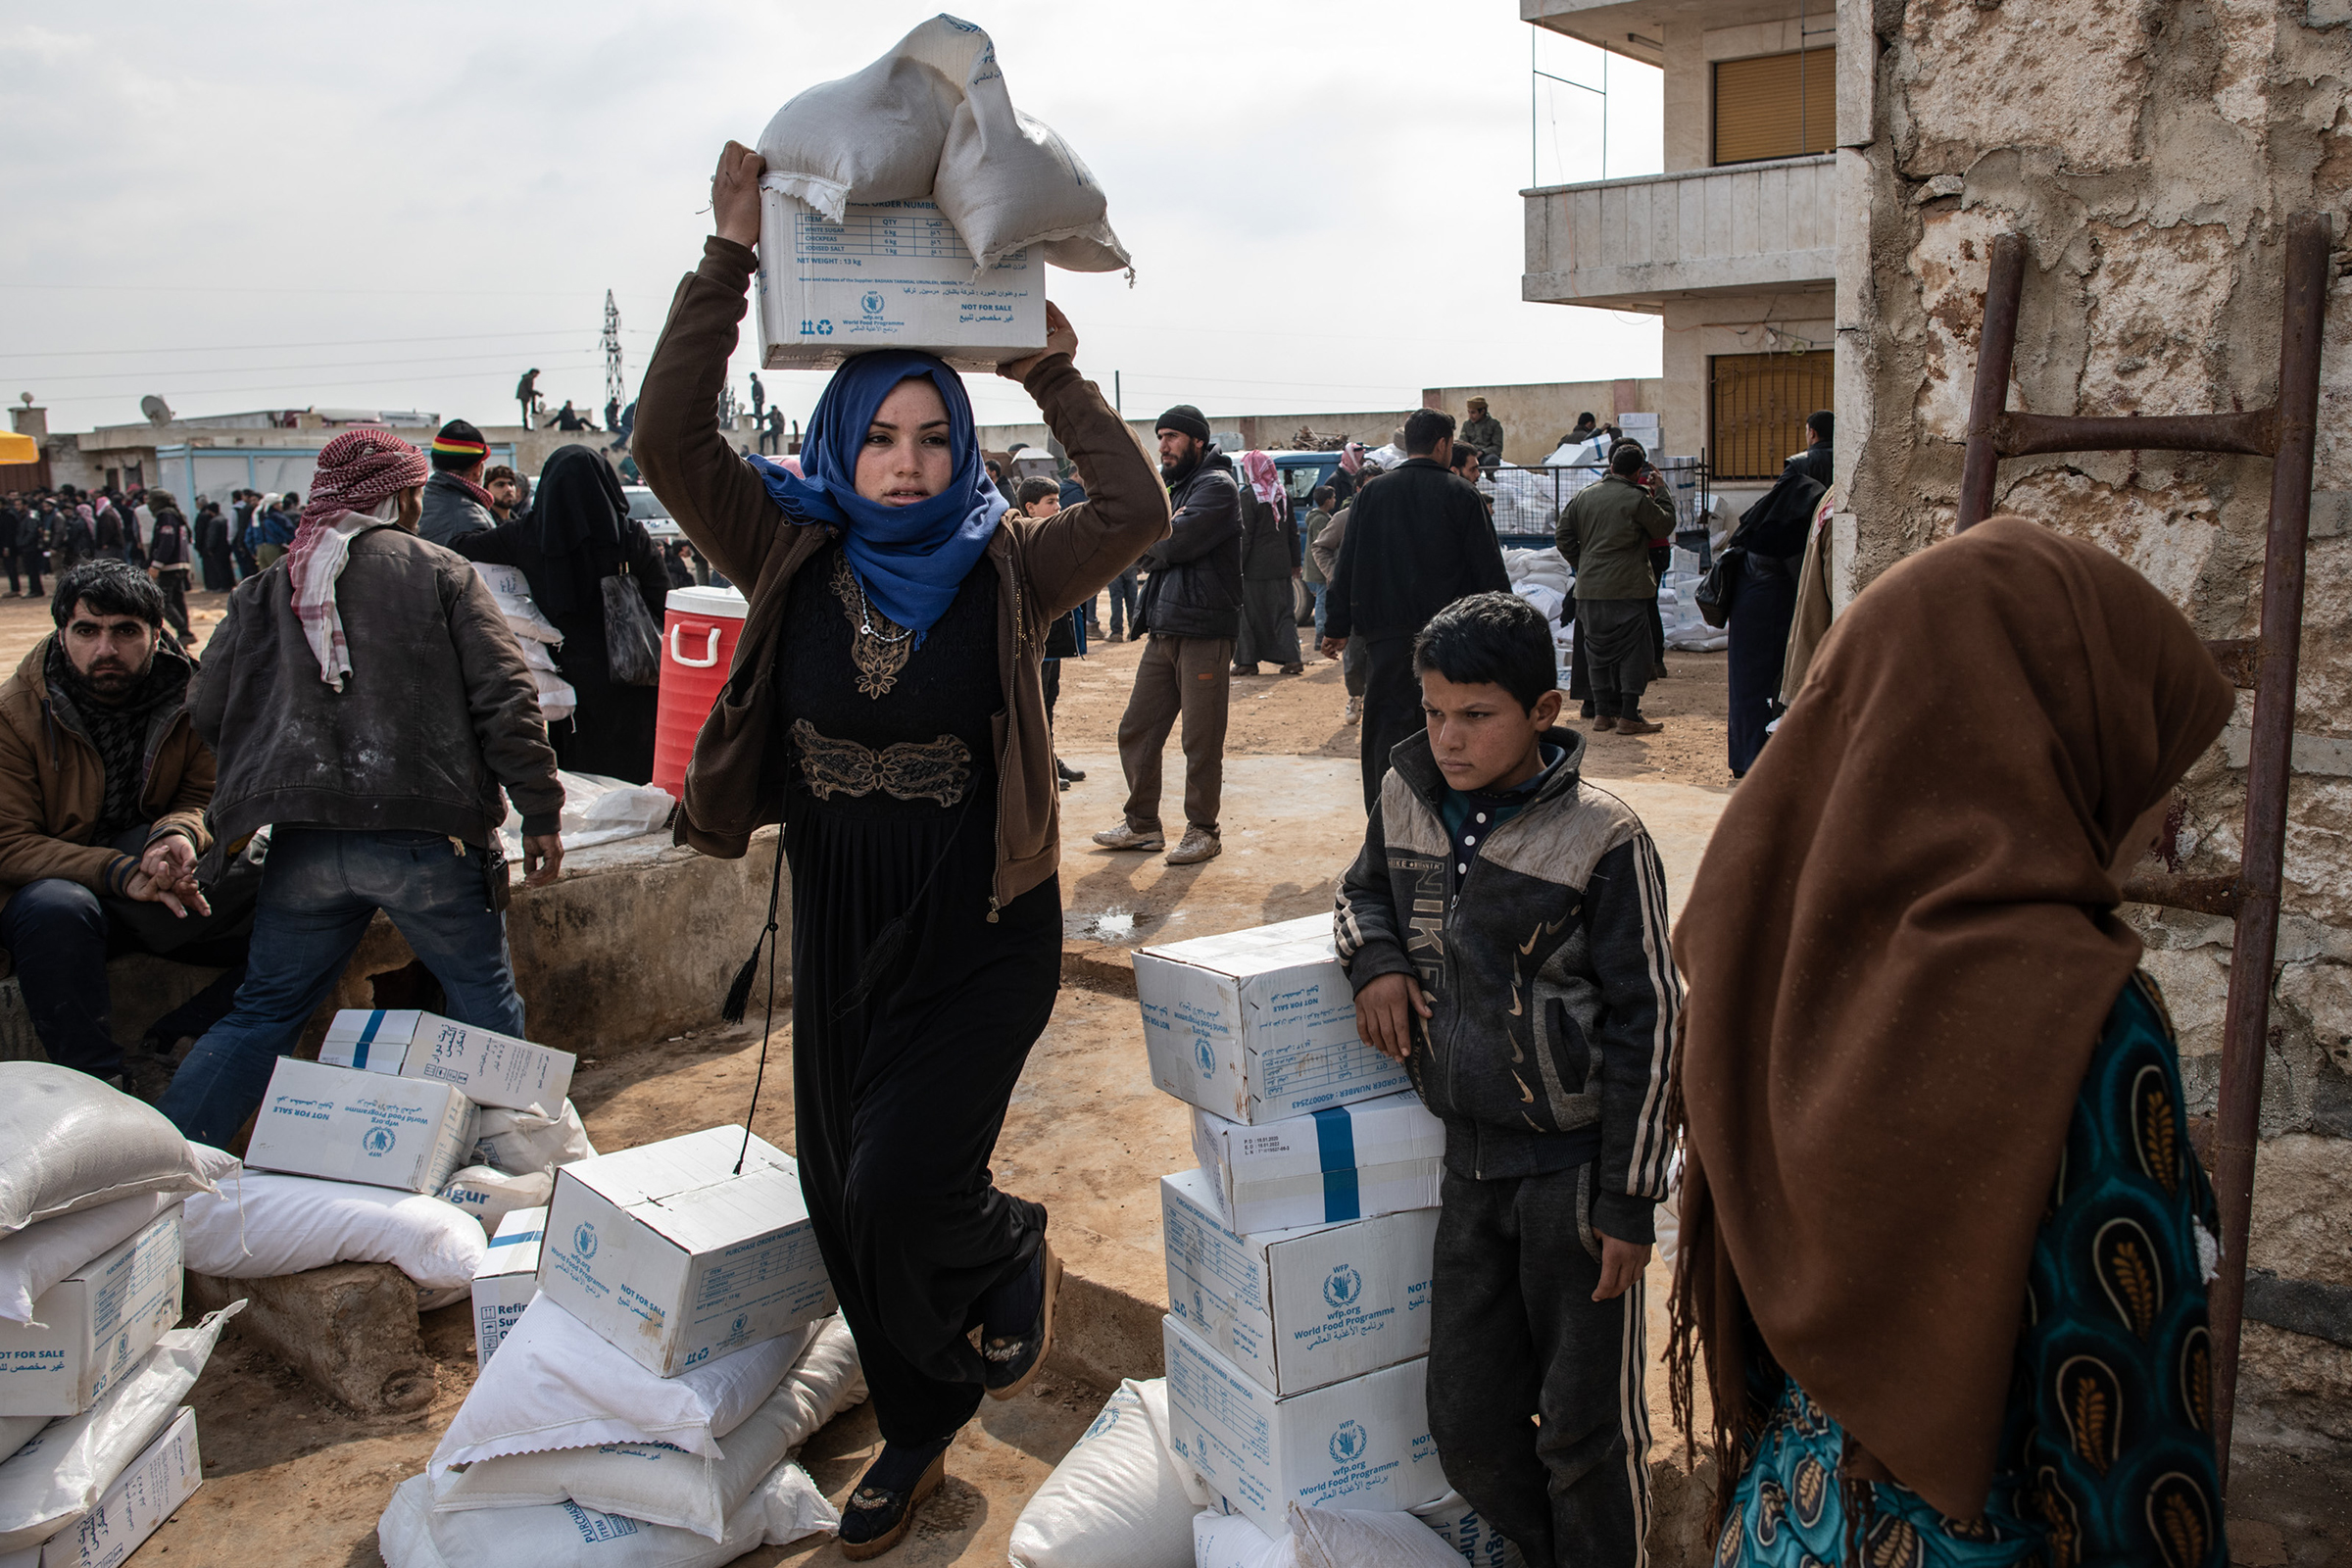 A displaced woman carries a box of humanitarian aid supplied by an NGO in Idlib, Syria, on Feb. 19, 2020.